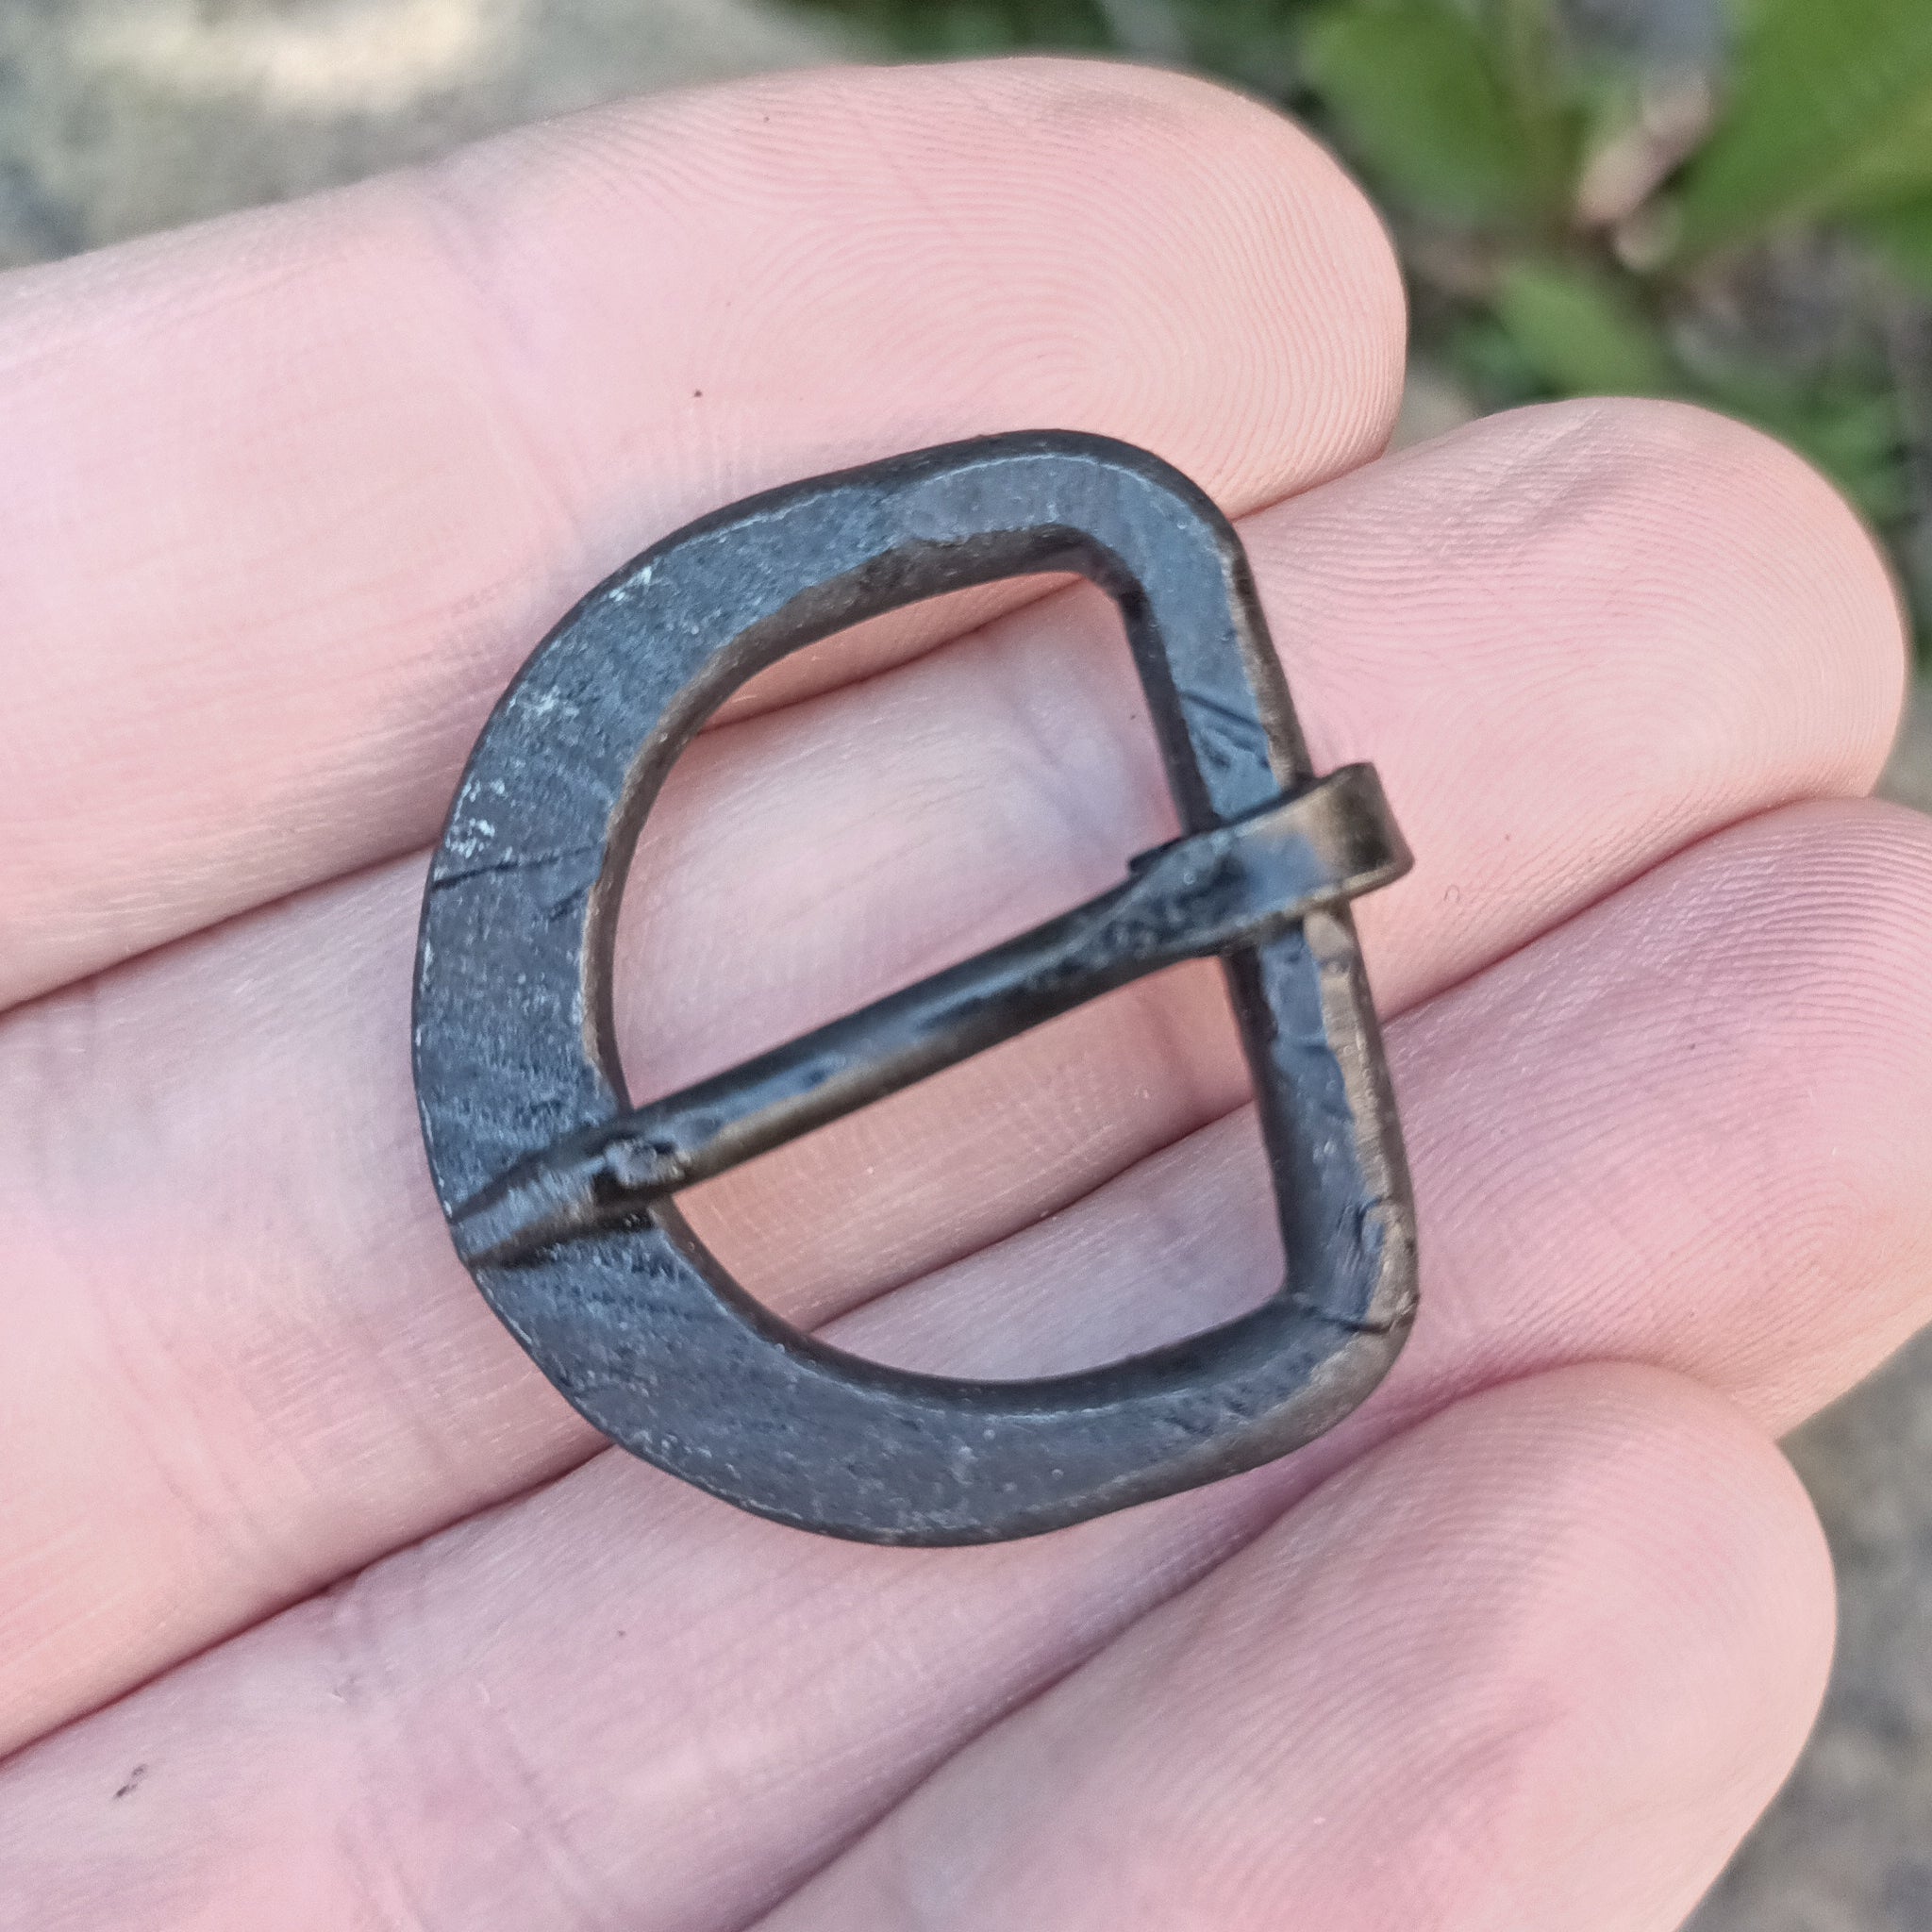 Hand-Forged Iron Viking / Medieval Buckle - 20mm (0.75 inch) on Hand